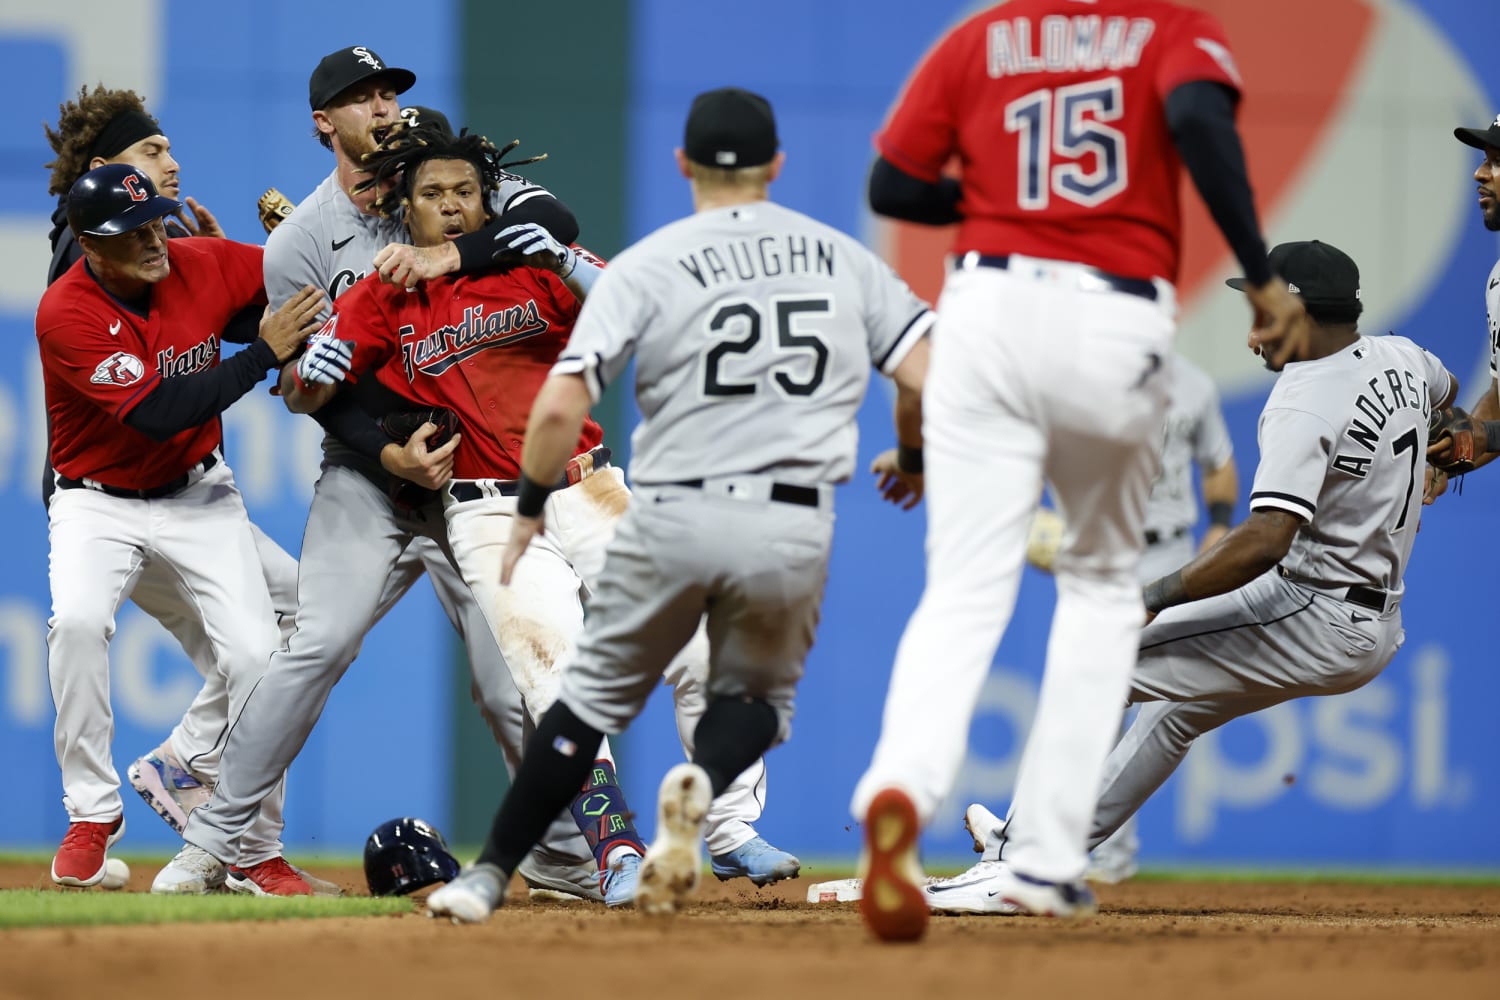 Chicago White Soxs Tim Anderson to miss 6 games, Cleveland Guardians José Ramírez out 3 for bench-clearing brawl